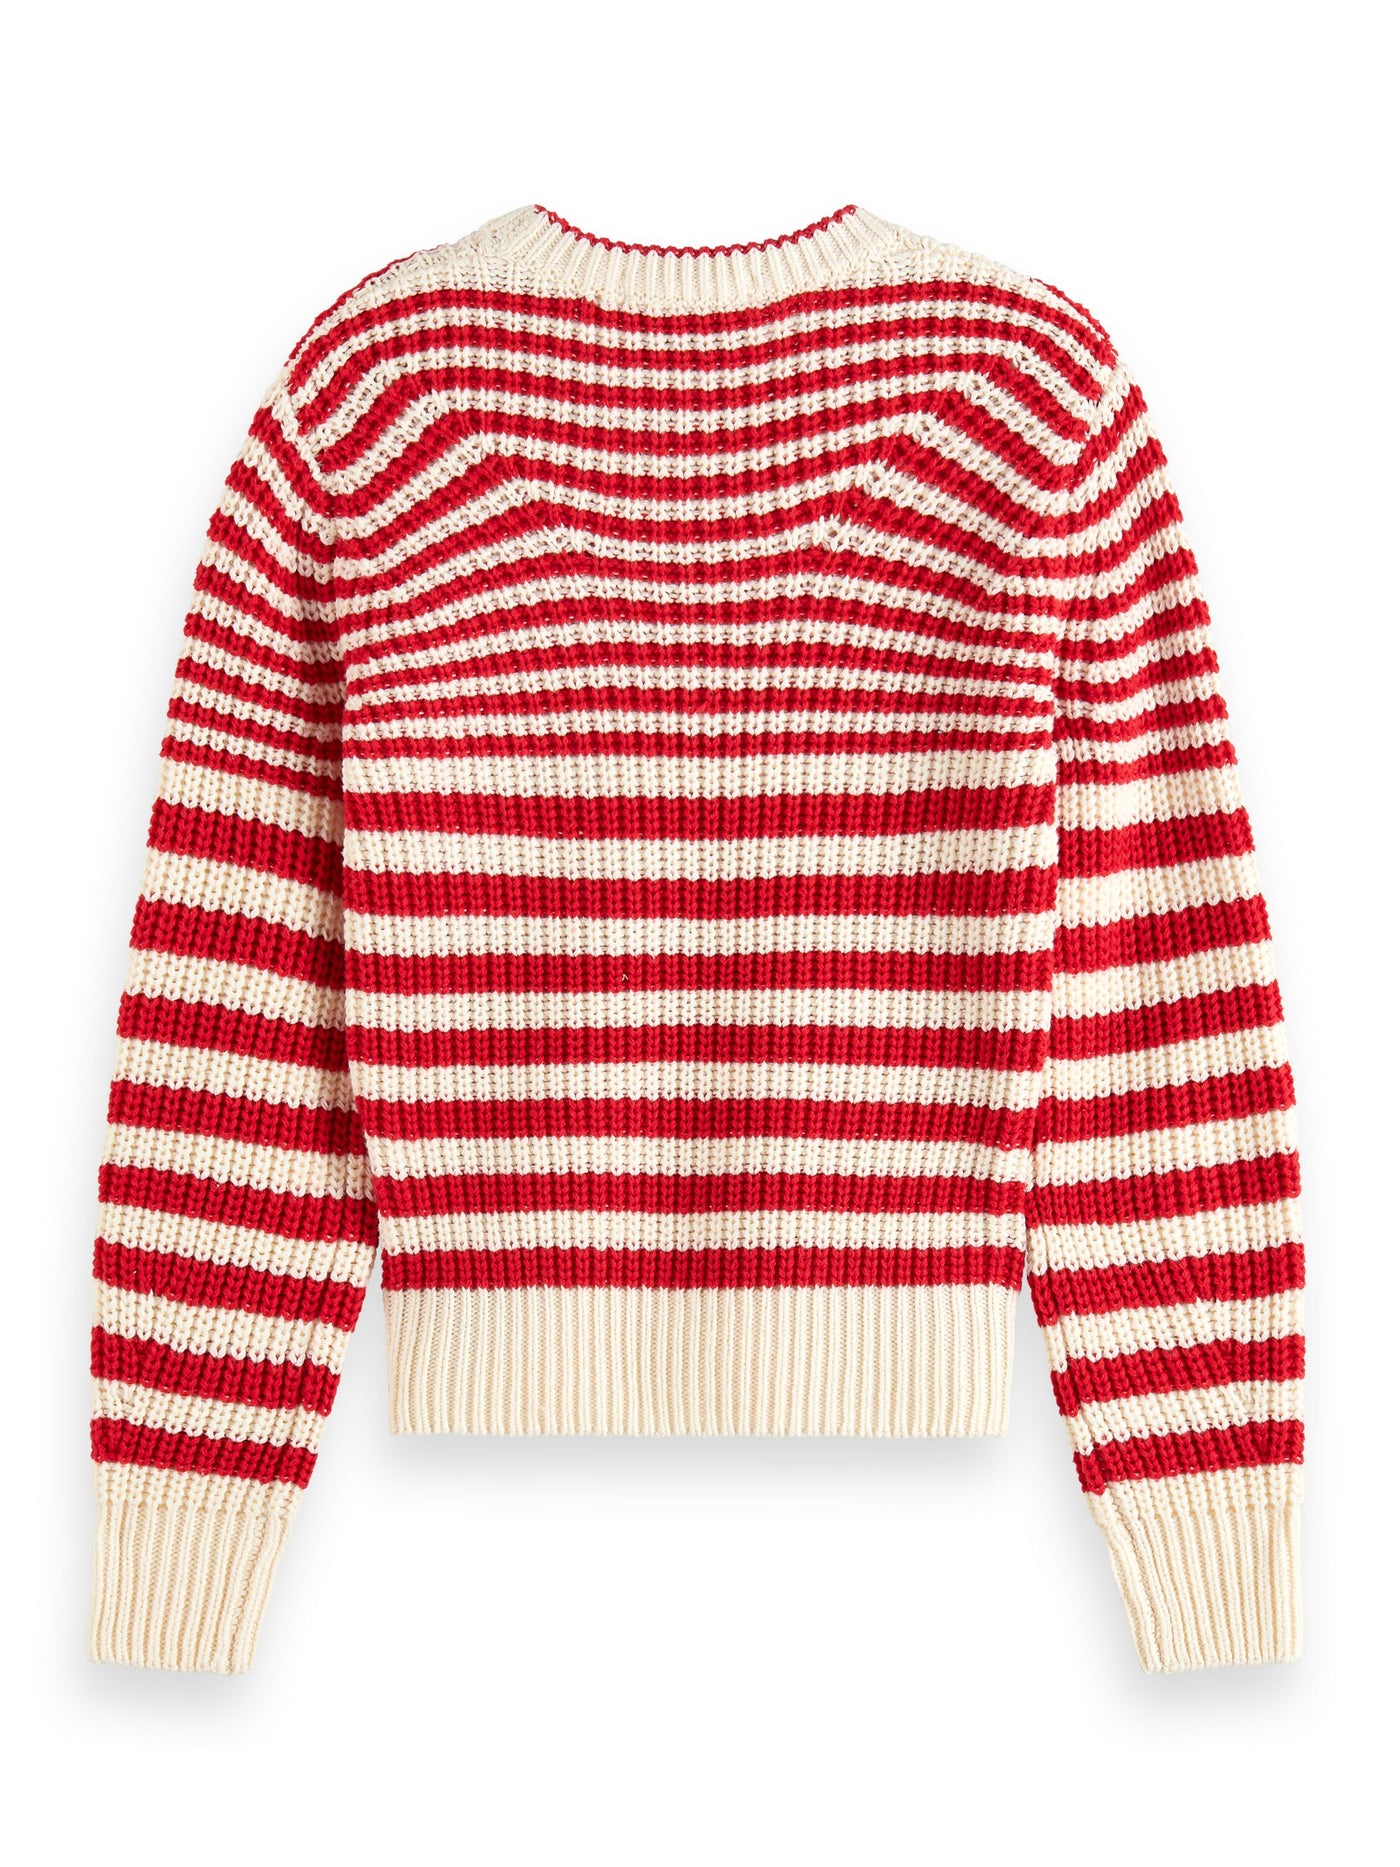 Girl Striped Pullover | Red/White